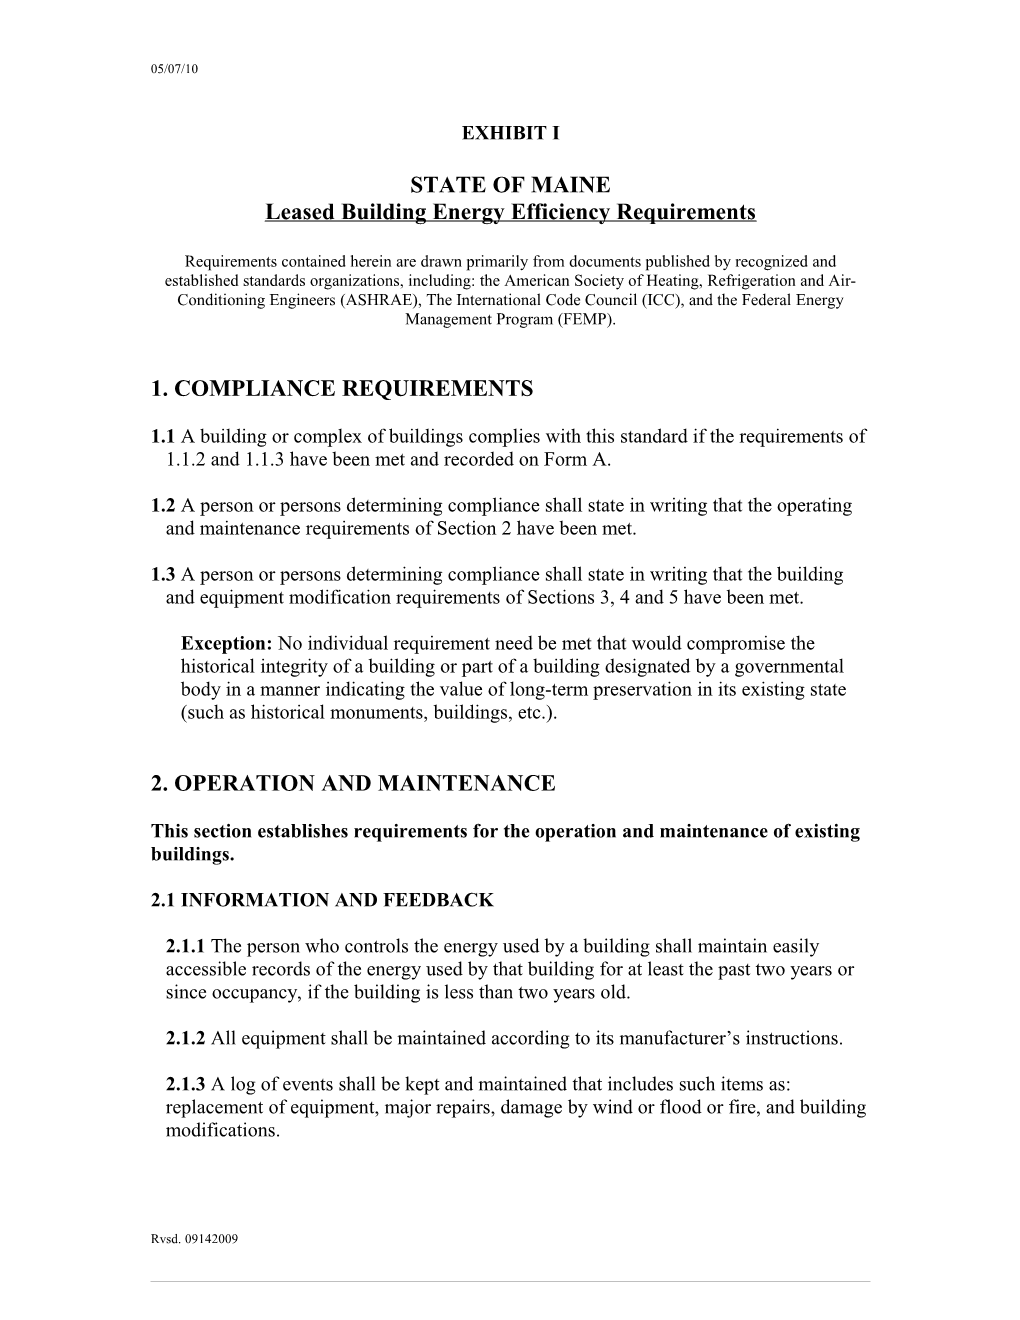 Leased Building Energy Efficiency Requirements